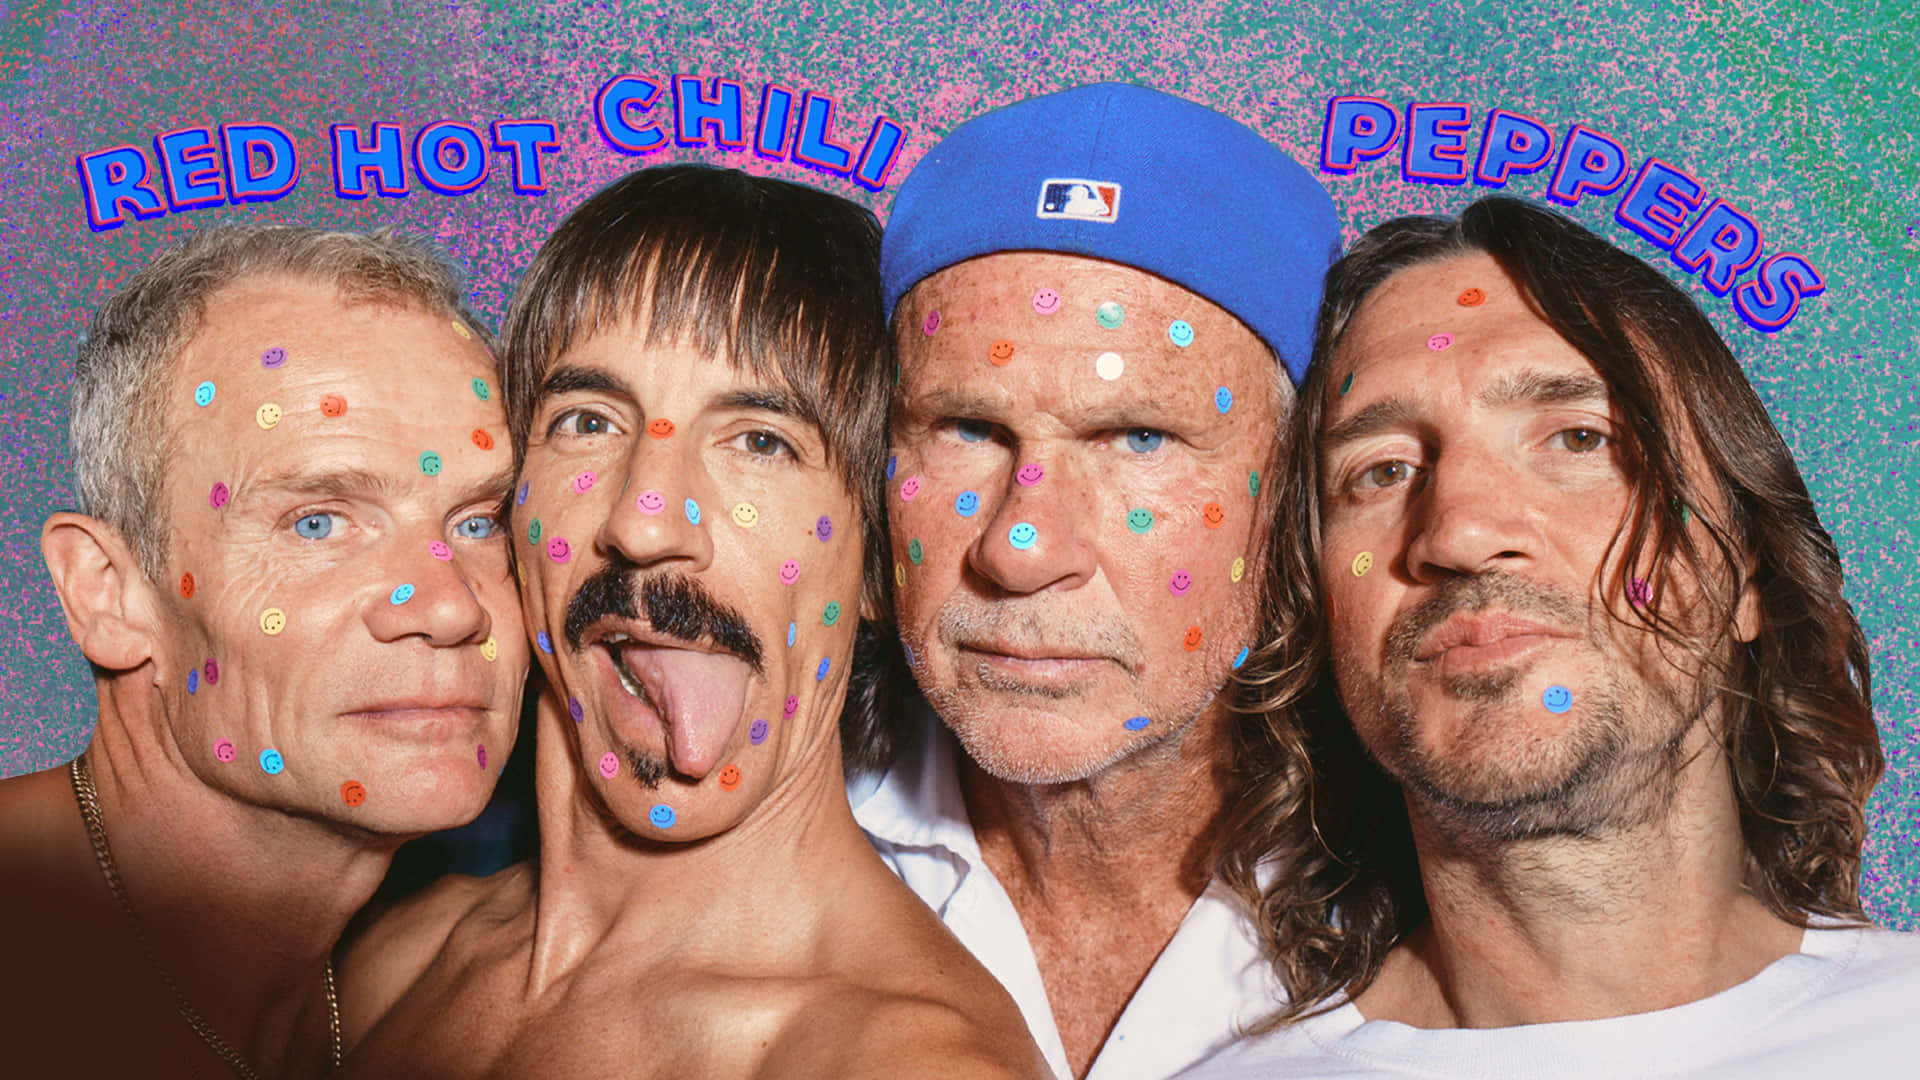 Red Hot Chili Peppers With Colorful Spots Wallpaper